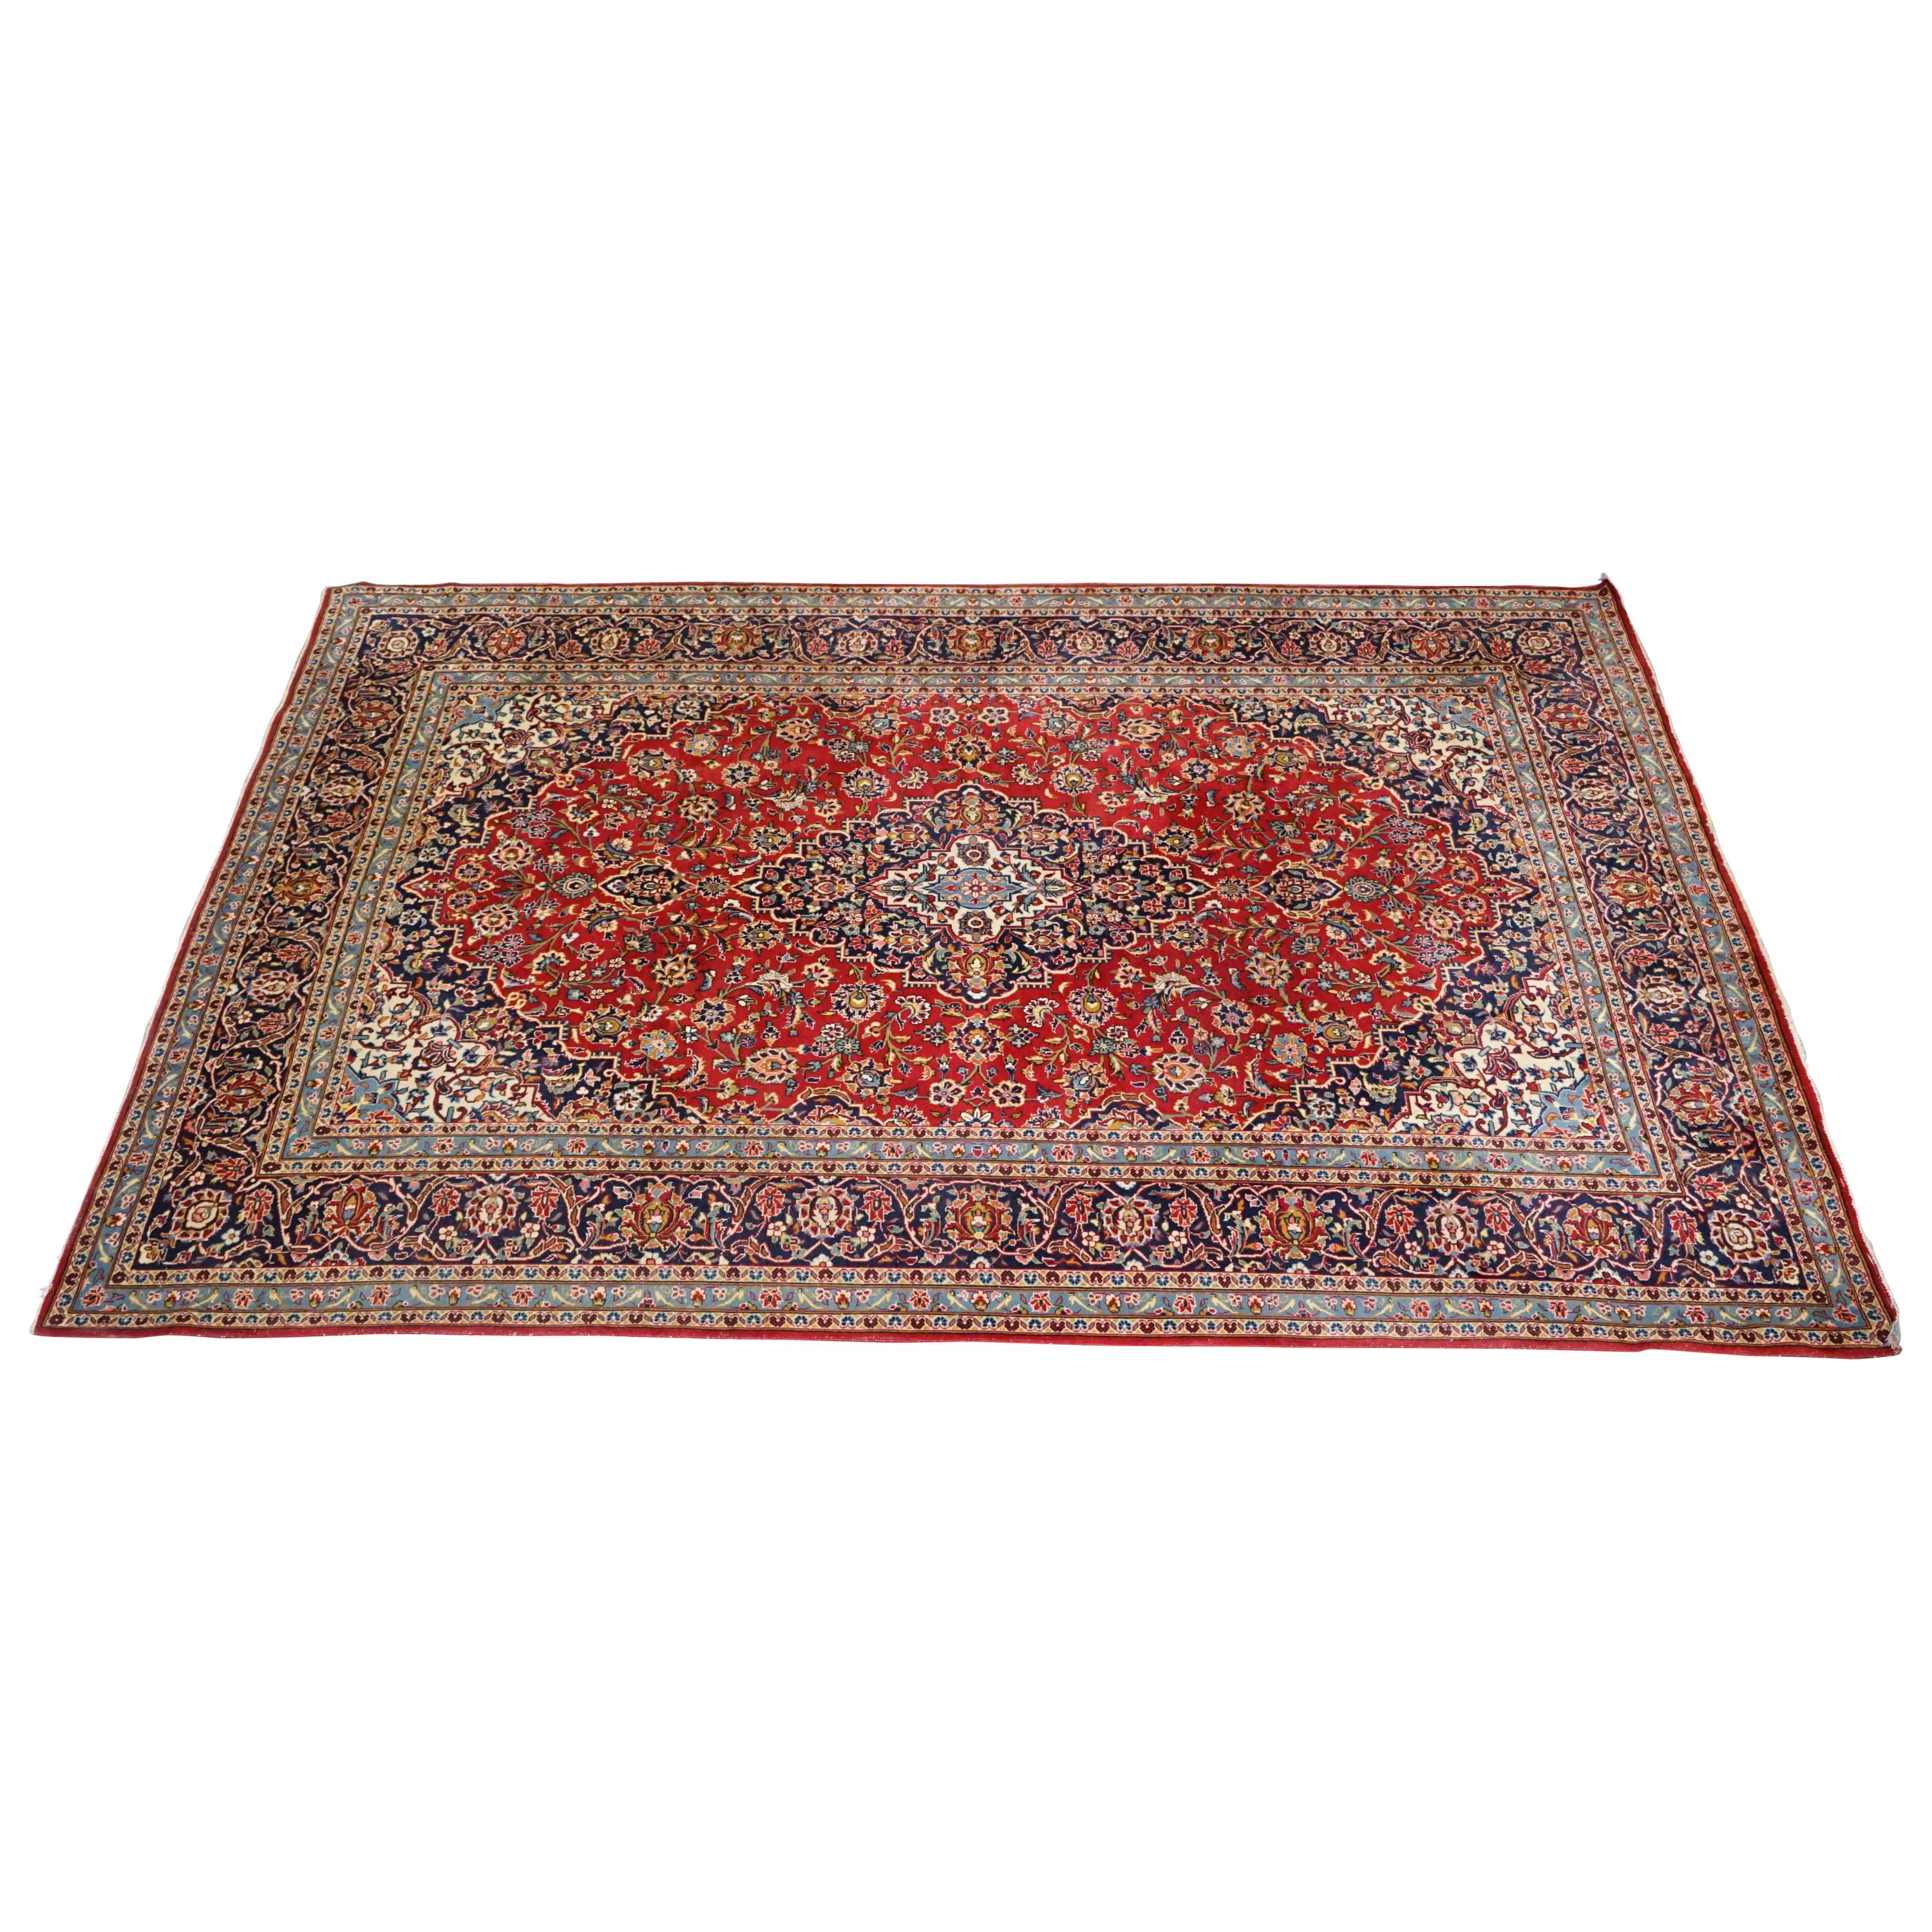 Liberty London Tabriz Garden Floral Rug Large Fine Hand Knotted